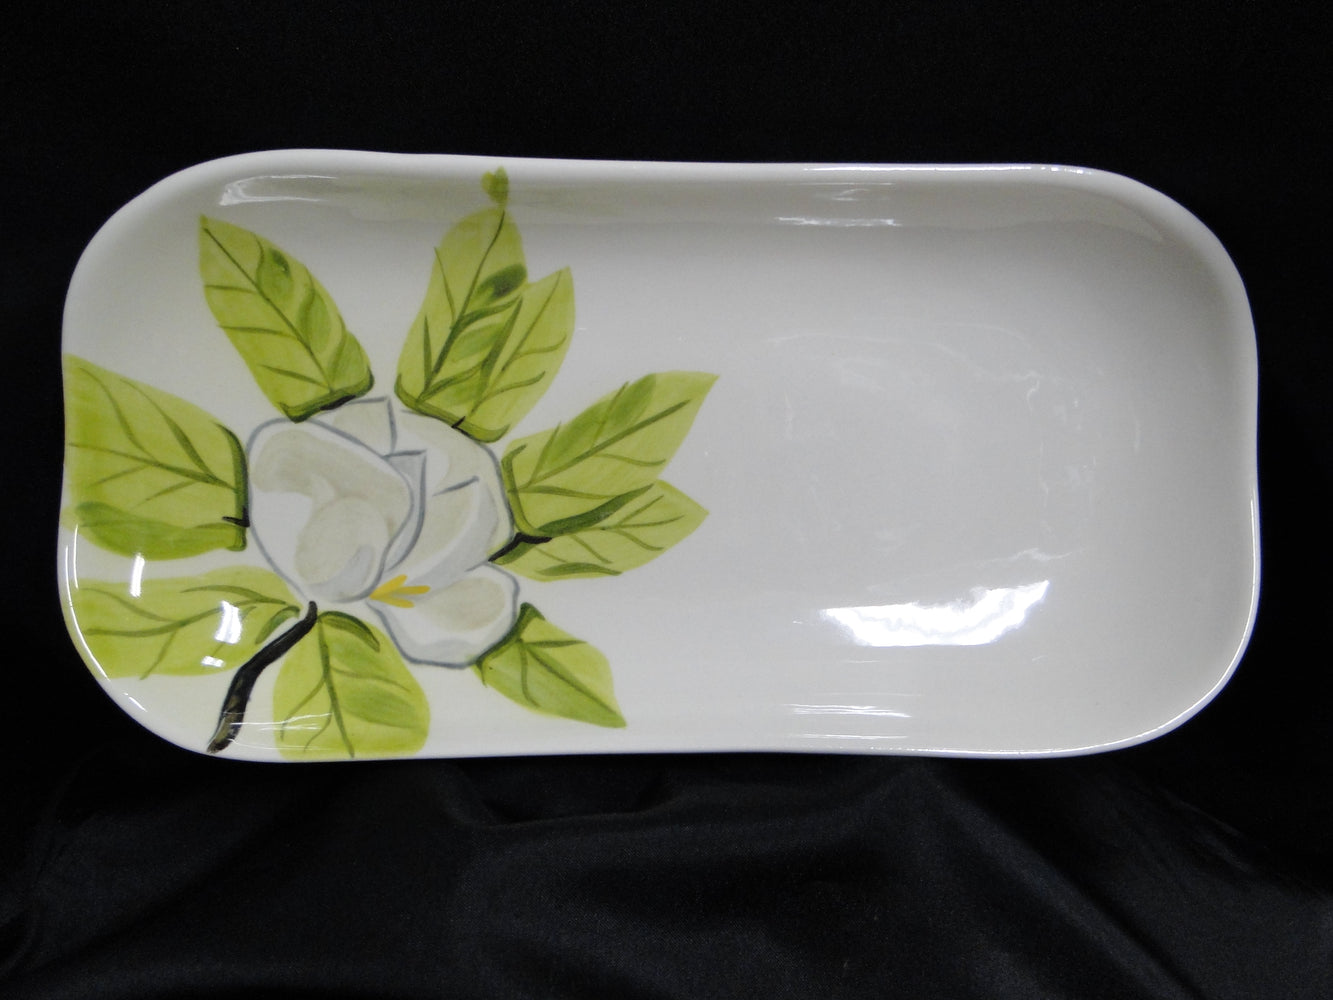 Red Wing Magnolia Chartreuse, MCM: Celery Tray, 11 1/4" x 5 5/8"